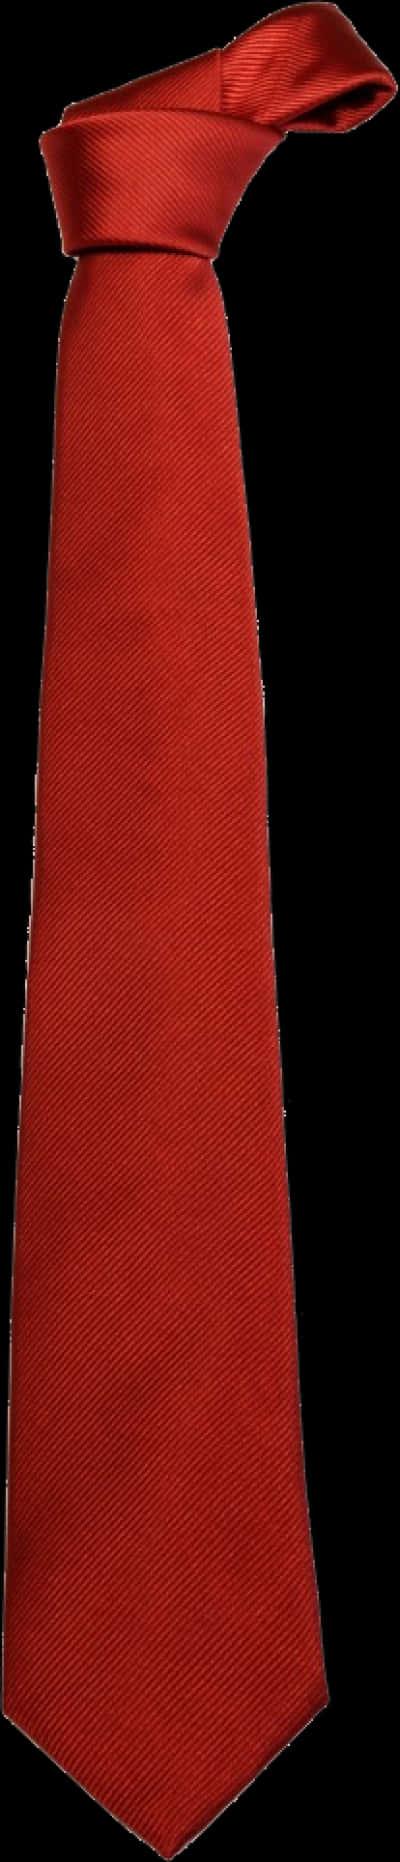 Red Tie Background Transparent'title='red - Silk, Hd Png Download